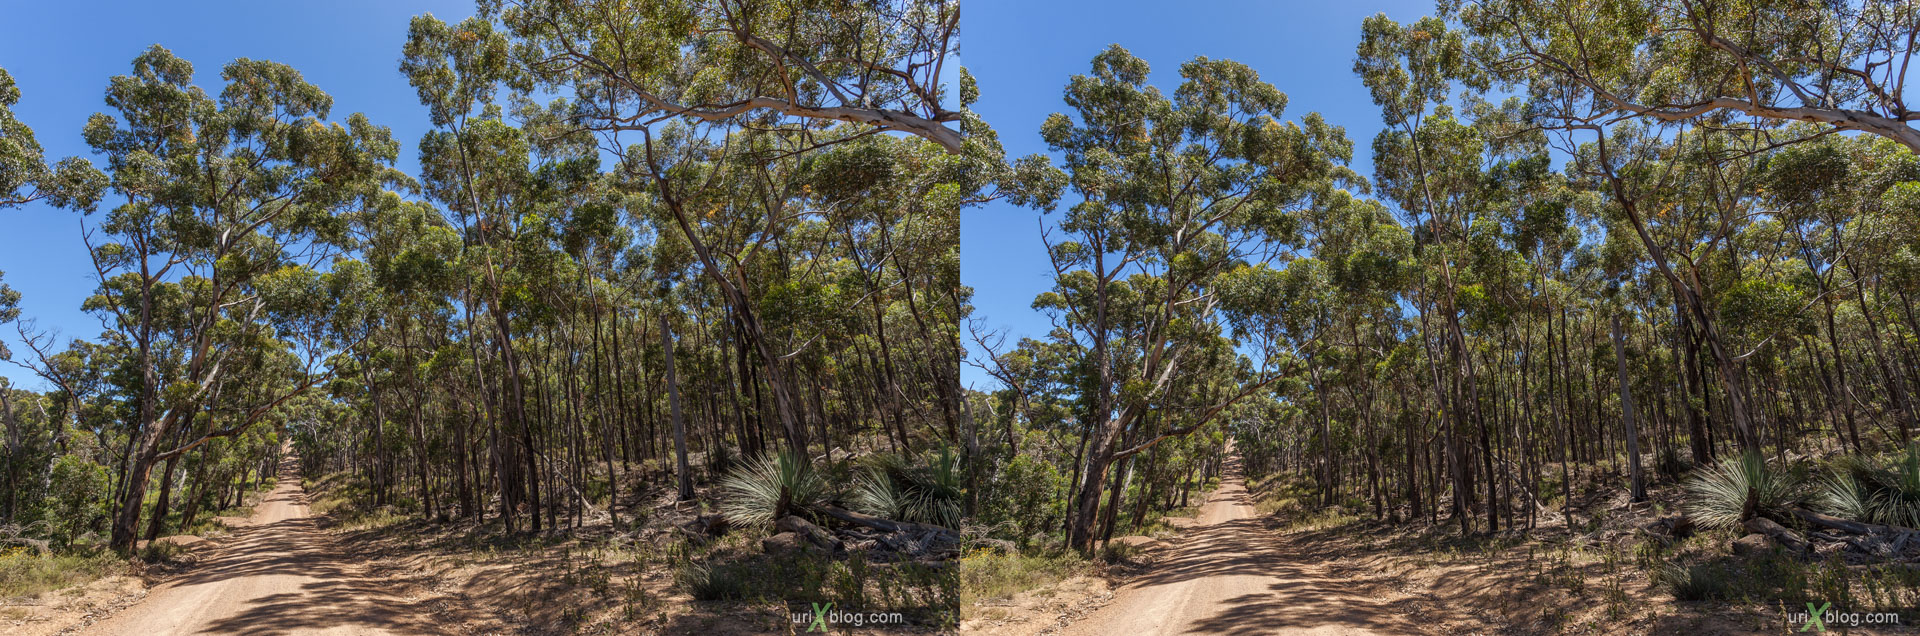 forest, road, Ravine Des Casoars Wilderness Protection Area, Kangaroo Island, Australia, 3D, stereo pair, cross-eyed, crossview, cross view stereo pair, stereoscopic, 2011